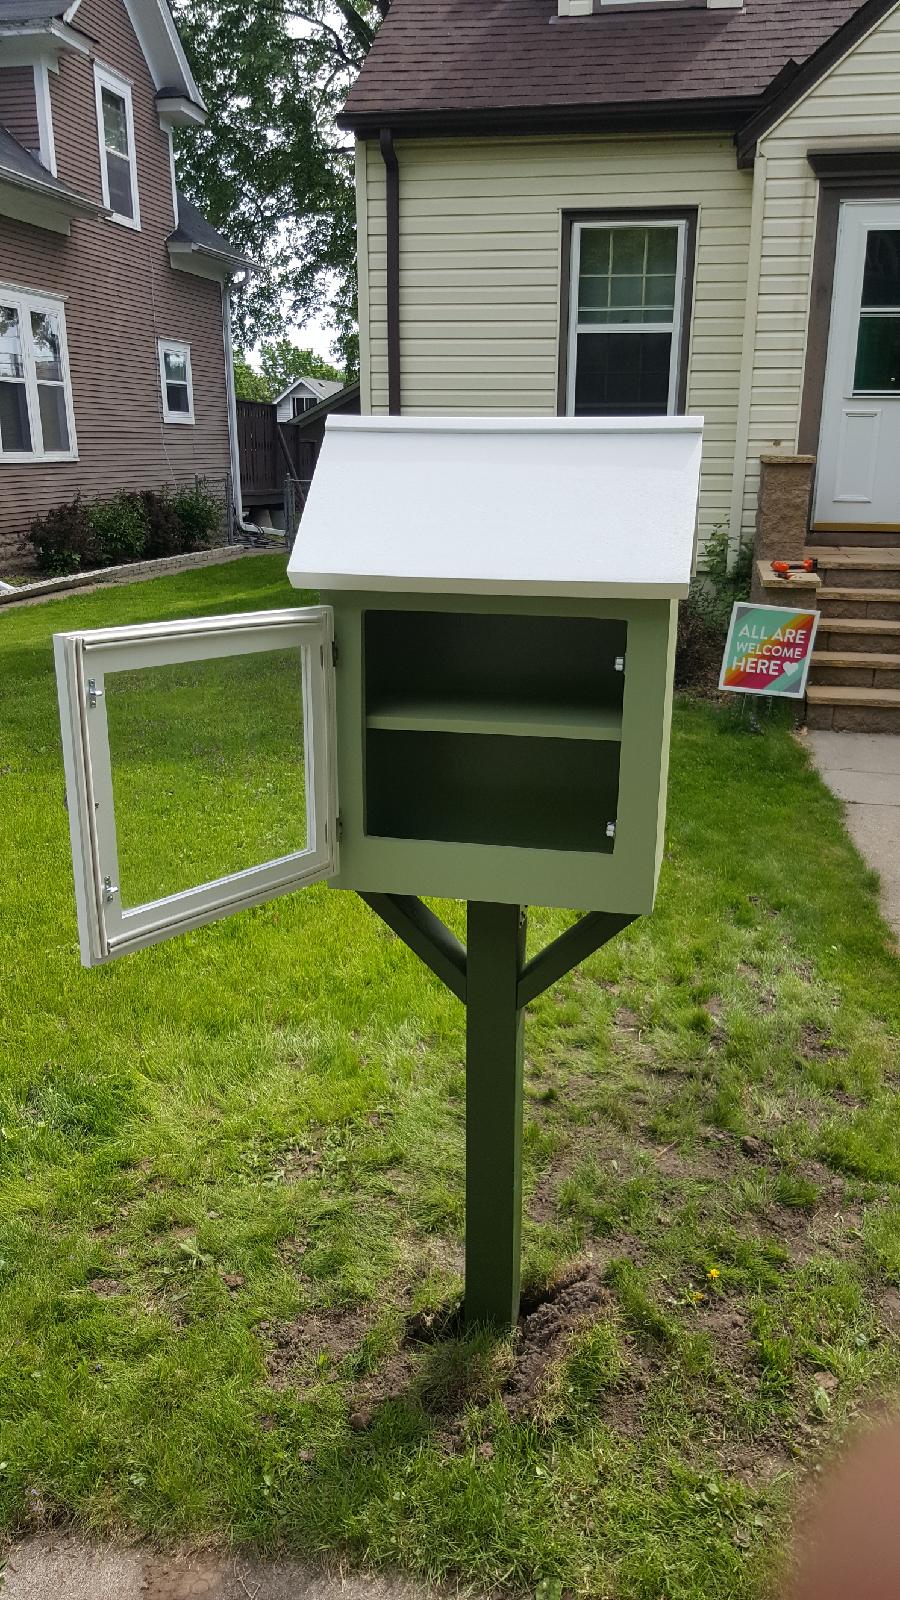 our new lottle free library!